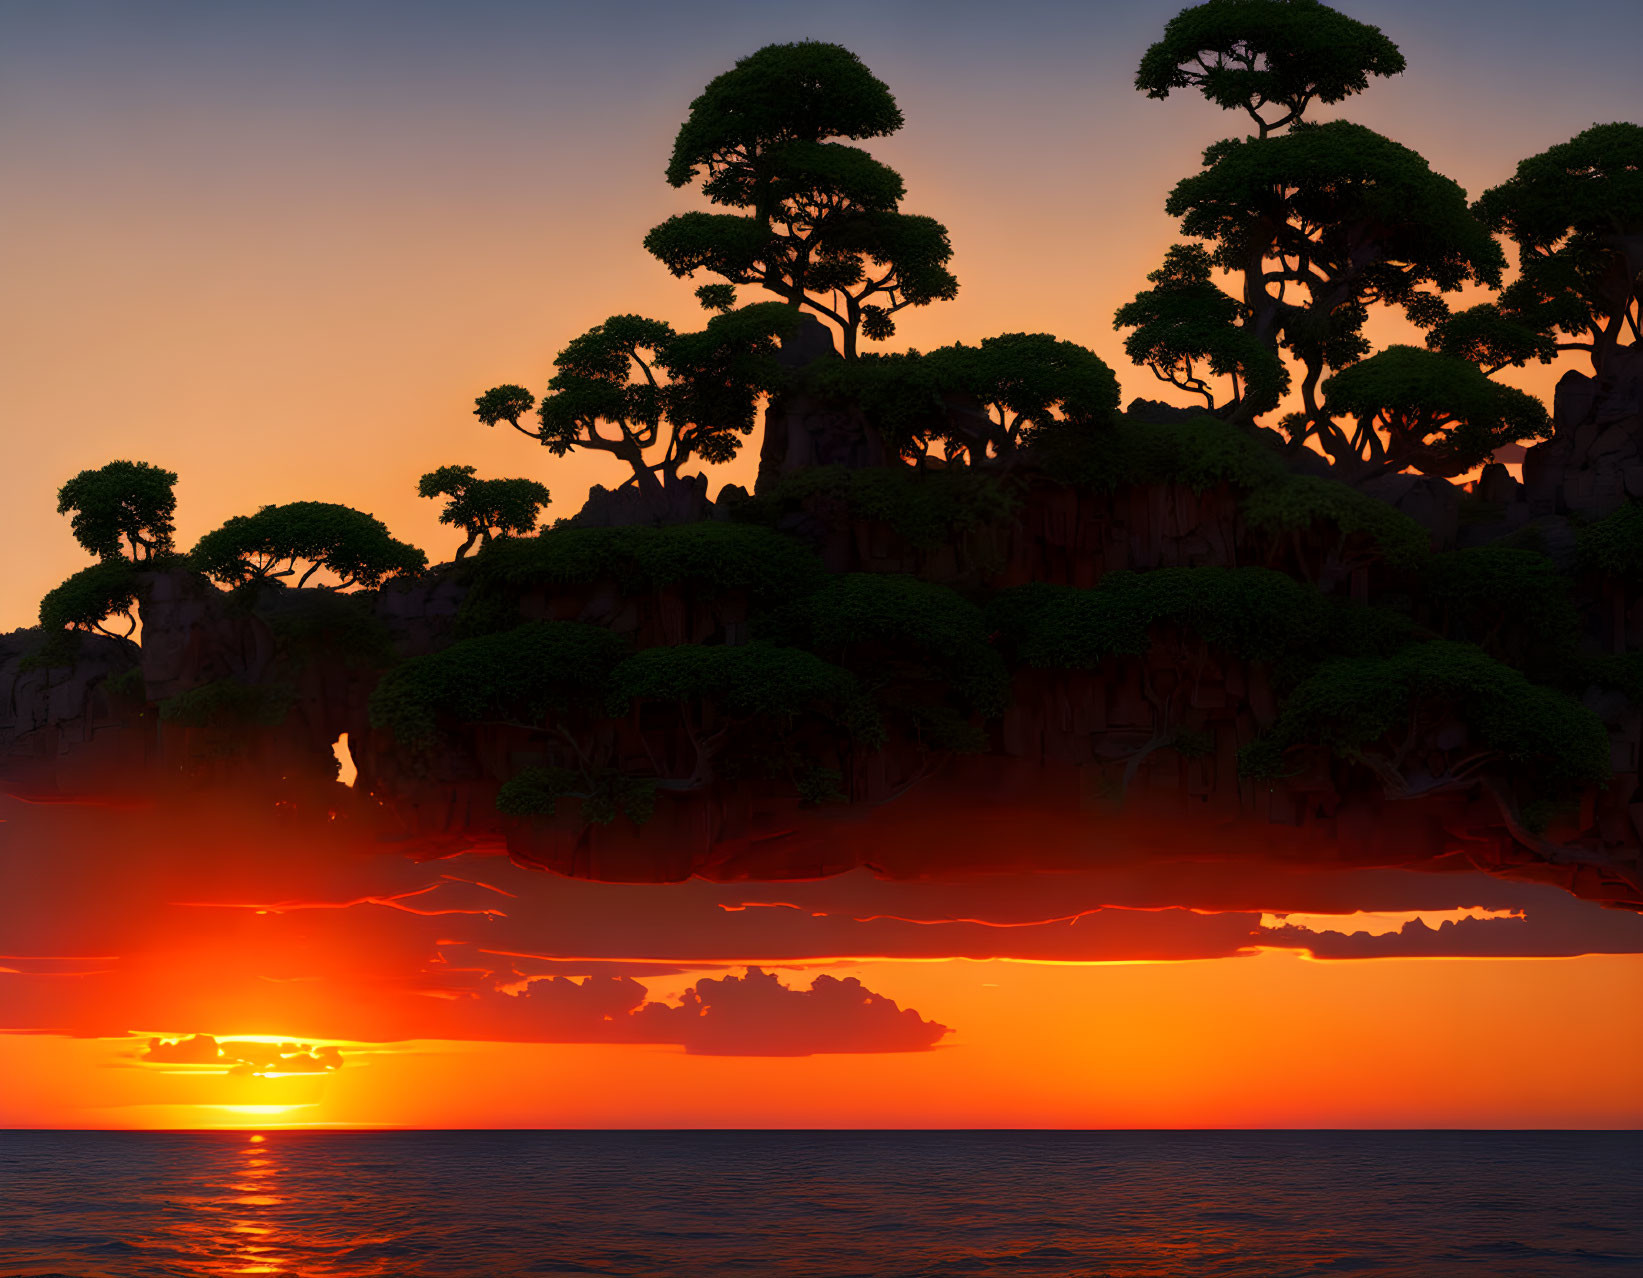 Tranquil sunset with silhouetted trees on cliff and sun's reflection in ocean